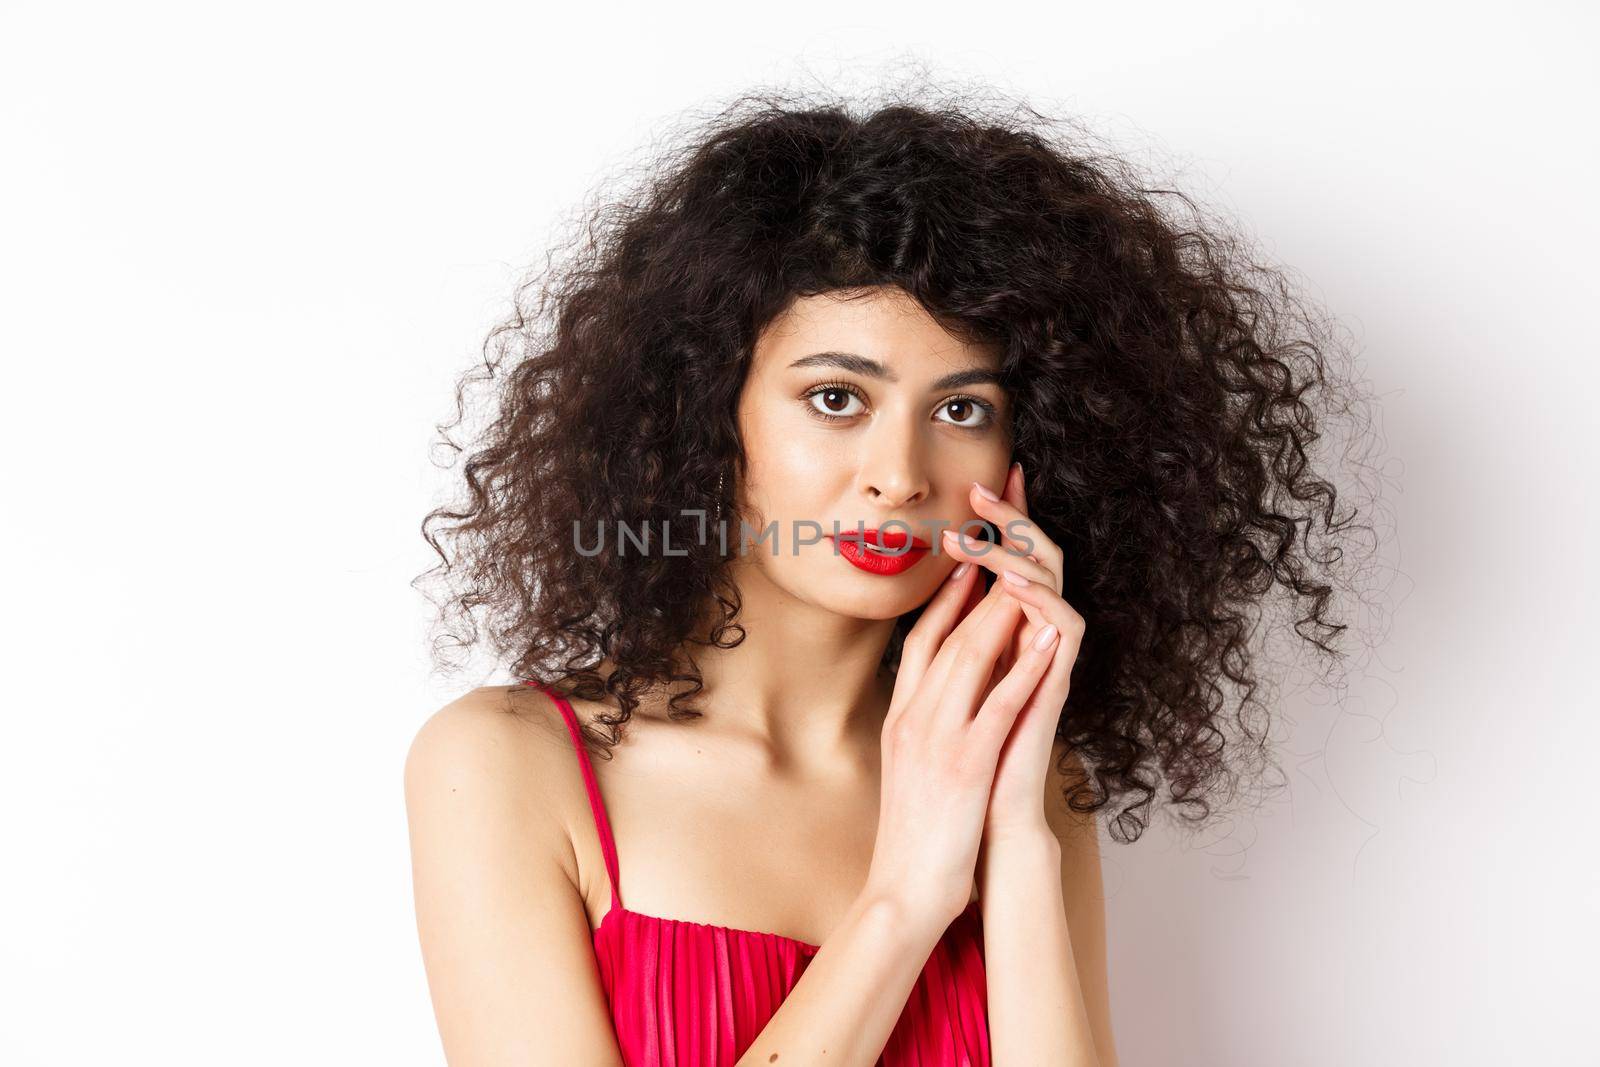 Close-up of tender romantic woman, gently touching face and looking sensual at camera, white background.